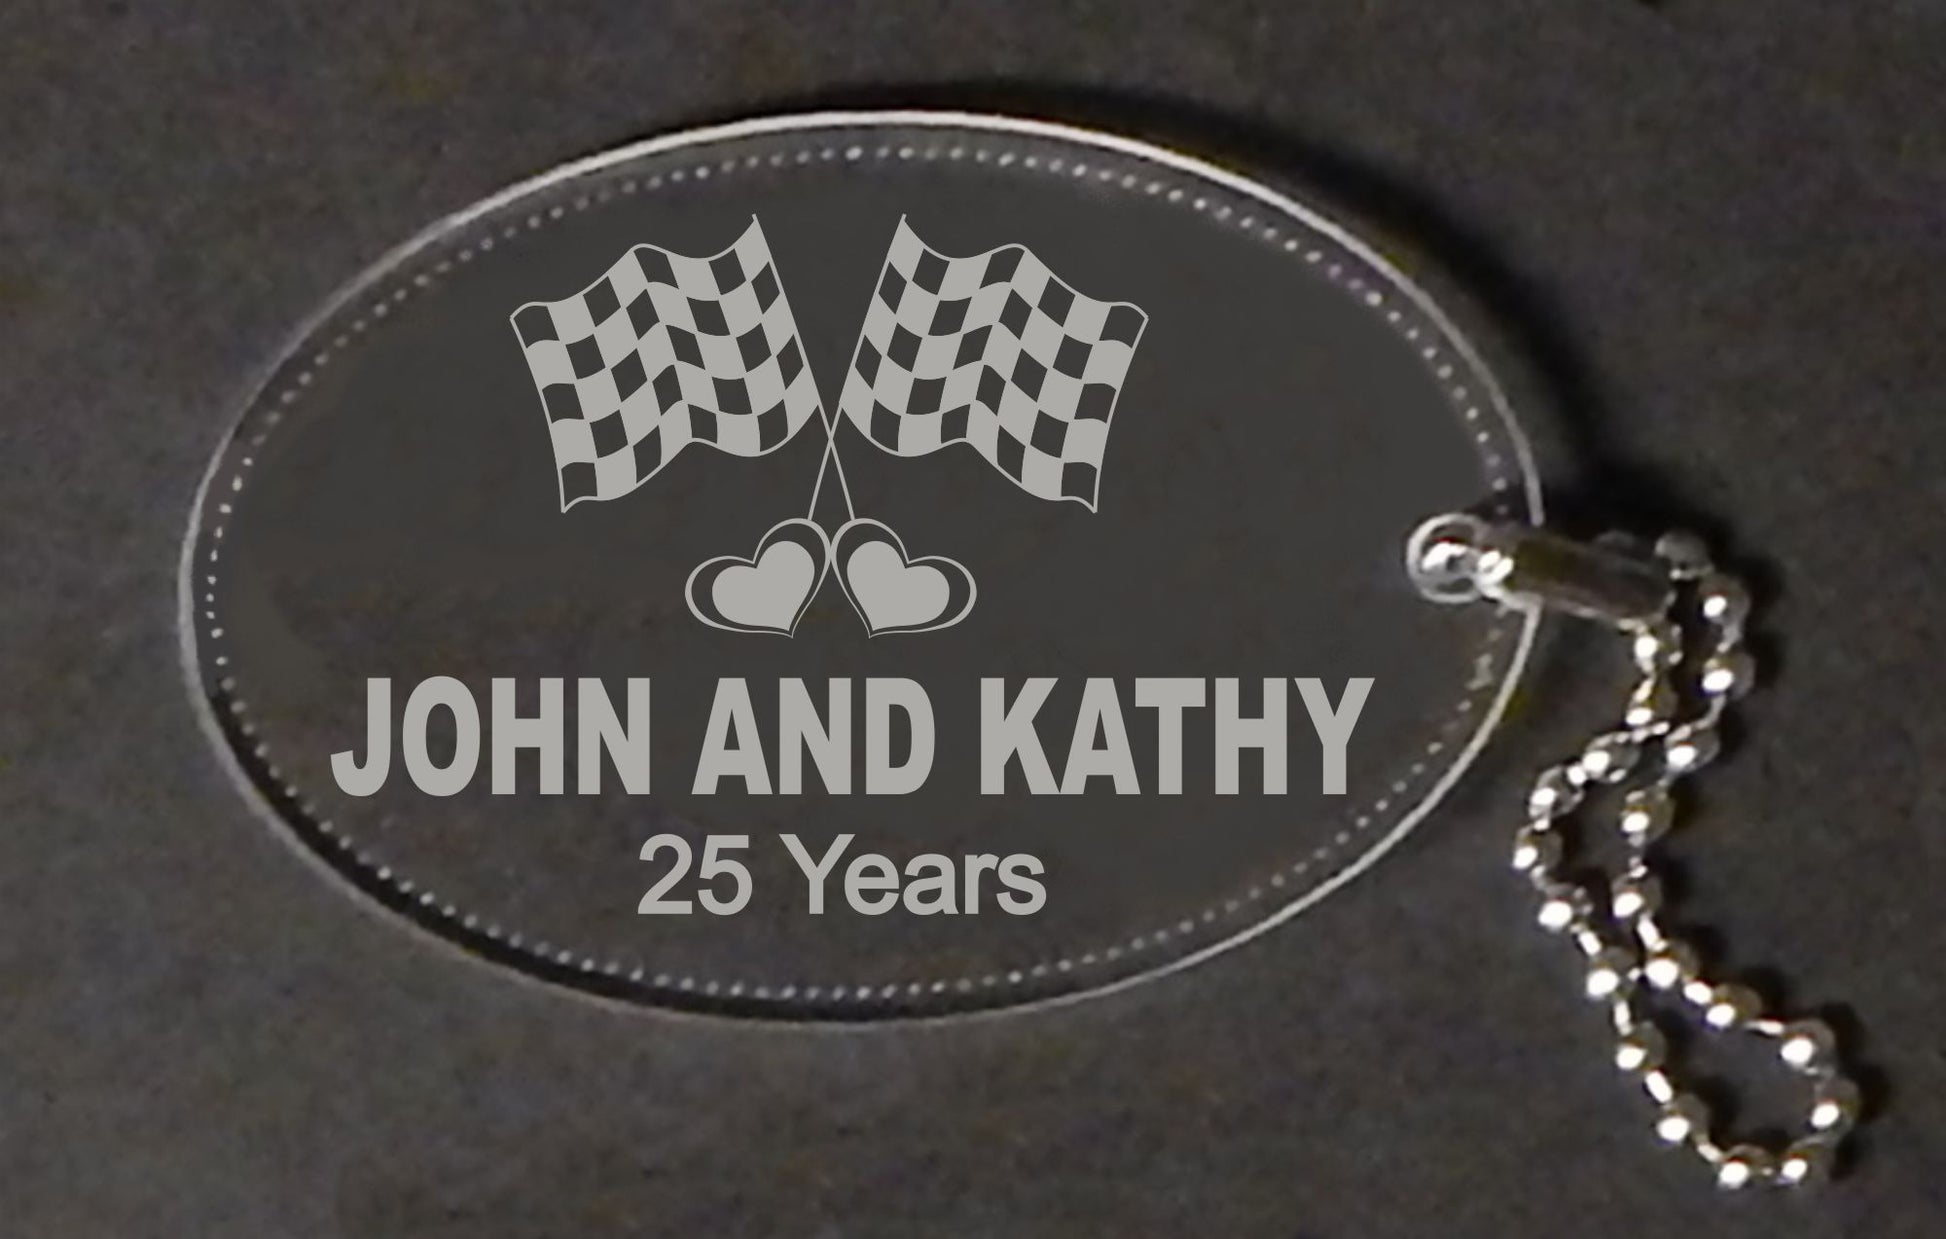 oval acrylic keychain designed with a set of racing flags along with names and anniversary years, with a small metal chain attached